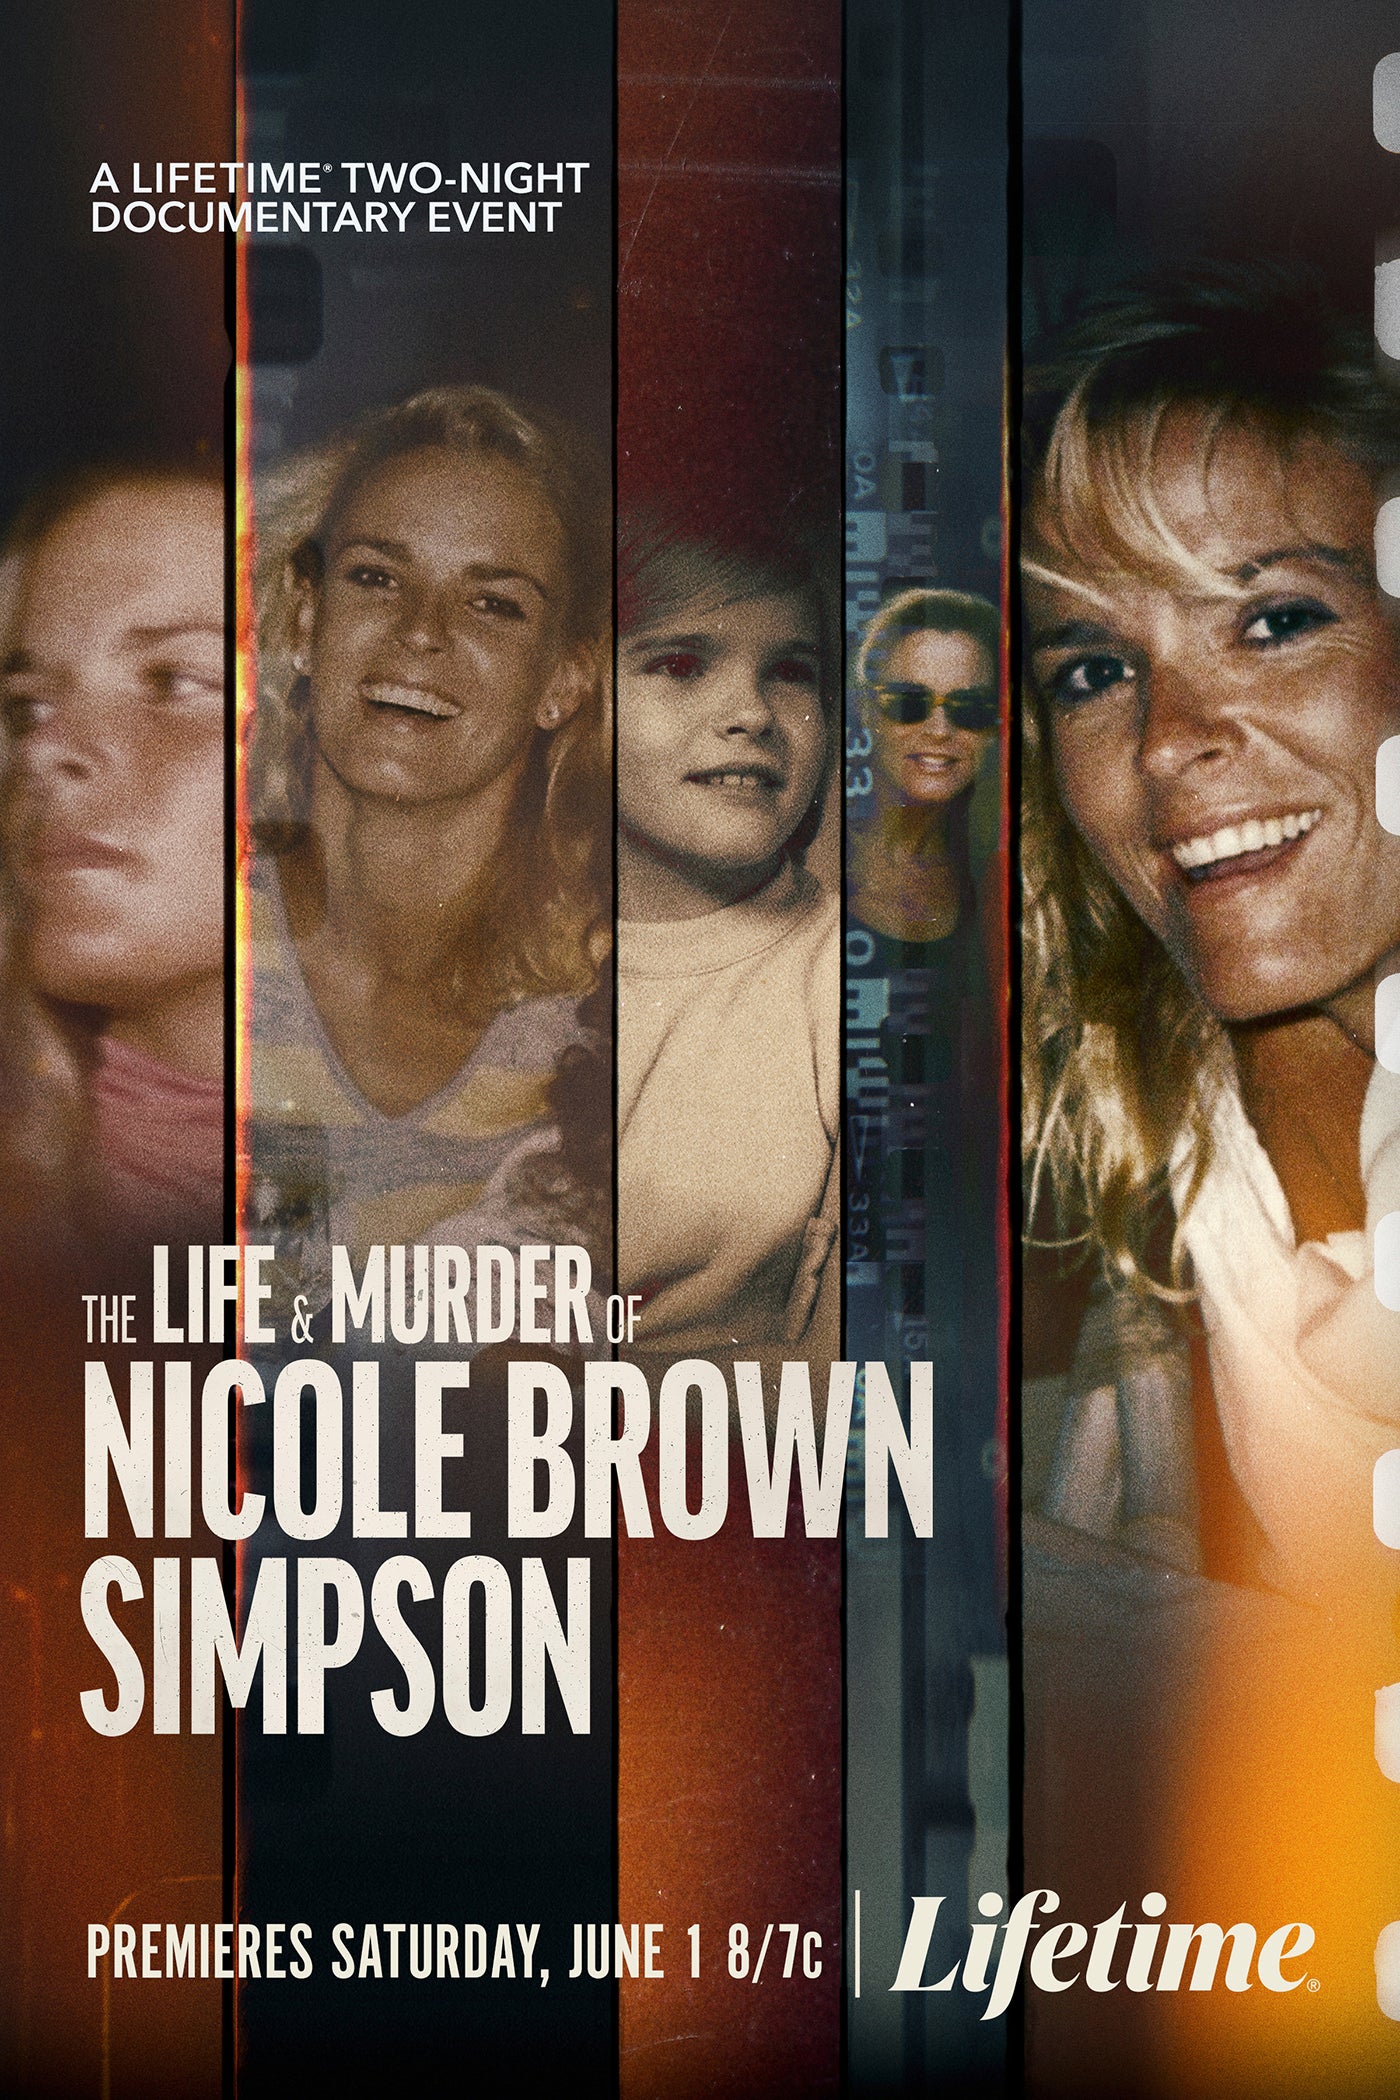 This image released by Lifetime shows promotional art for “The Life & Murder of Nicole Brown Simpson," premiering June 1 on Lifetime.